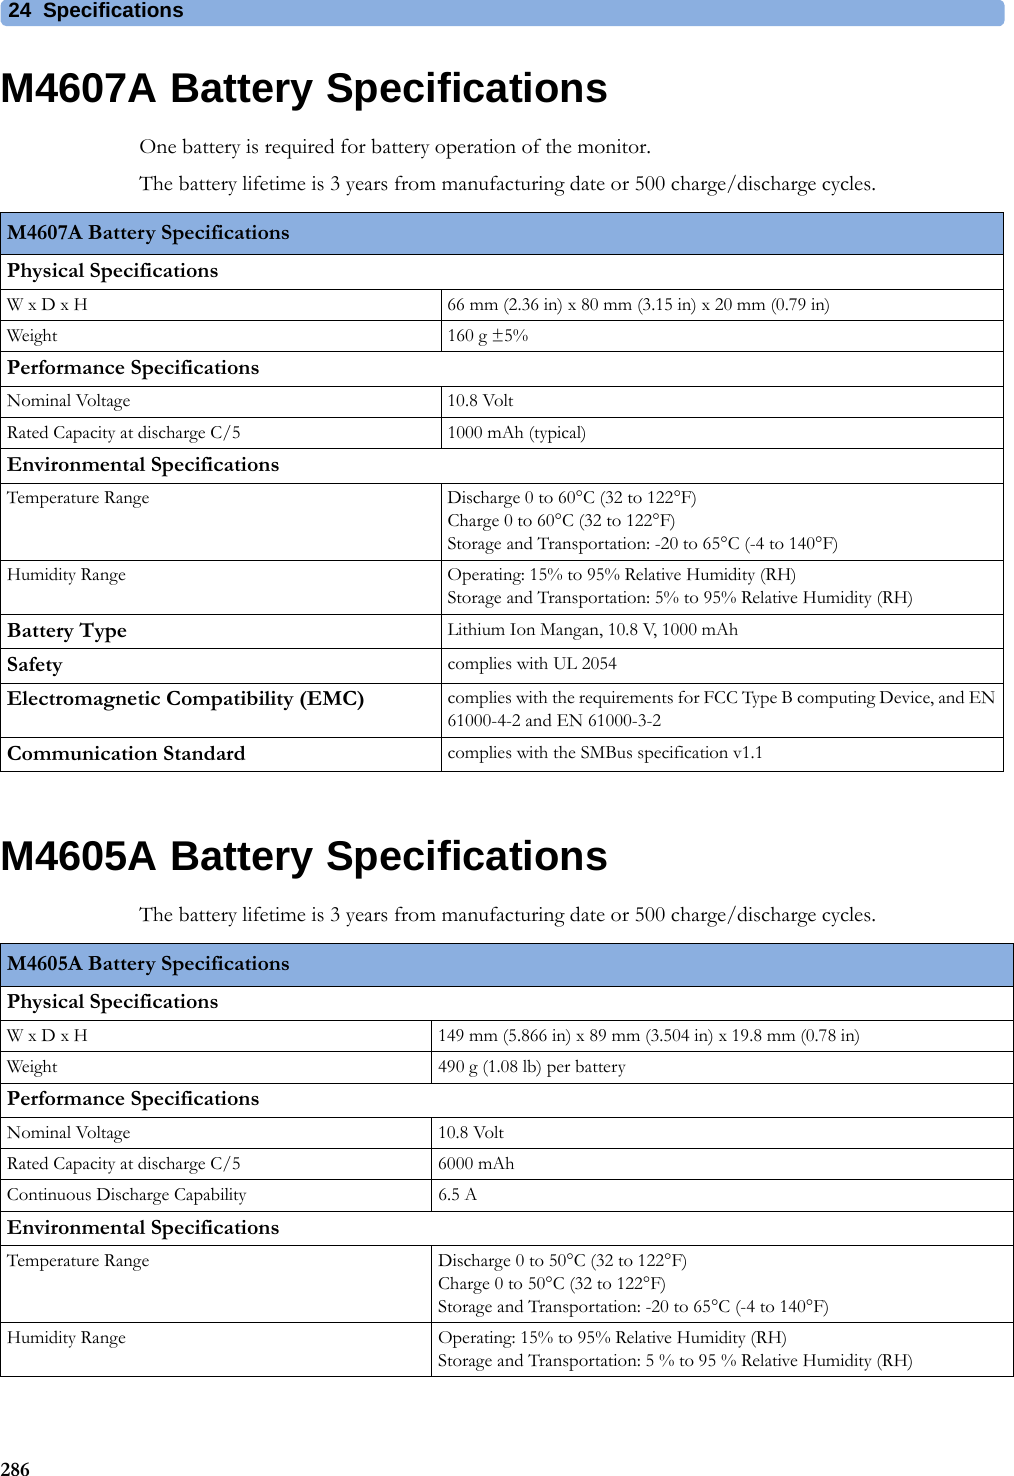 24 Specifications286M4607A Battery SpecificationsOne battery is required for battery operation of the monitor.The battery lifetime is 3 years from manufacturing date or 500 charge/discharge cycles.M4605A Battery SpecificationsThe battery lifetime is 3 years from manufacturing date or 500 charge/discharge cycles.M4607A Battery SpecificationsPhysical SpecificationsW x D x H 66 mm (2.36 in) x 80 mm (3.15 in) x 20 mm (0.79 in)Weight 160 g ±5%Performance SpecificationsNominal Voltage 10.8 VoltRated Capacity at discharge C/5 1000 mAh (typical)Environmental SpecificationsTemperature Range Discharge 0 to 60°C (32 to 122°F)Charge 0 to 60°C (32 to 122°F)Storage and Transportation: -20 to 65°C (-4 to 140°F)Humidity Range Operating: 15% to 95% Relative Humidity (RH)Storage and Transportation: 5% to 95% Relative Humidity (RH)Battery Type Lithium Ion Mangan, 10.8 V, 1000 mAhSafety complies with UL 2054Electromagnetic Compatibility (EMC) complies with the requirements for FCC Type B computing Device, and EN 61000-4-2 and EN 61000-3-2Communication Standard complies with the SMBus specification v1.1M4605A Battery SpecificationsPhysical SpecificationsW x D x H 149 mm (5.866 in) x 89 mm (3.504 in) x 19.8 mm (0.78 in)Weight 490 g (1.08 lb) per batteryPerformance SpecificationsNominal Voltage 10.8 VoltRated Capacity at discharge C/5 6000 mAhContinuous Discharge Capability 6.5 AEnvironmental SpecificationsTemperature Range Discharge 0 to 50°C (32 to 122°F)Charge 0 to 50°C (32 to 122°F)Storage and Transportation: -20 to 65°C (-4 to 140°F)Humidity Range Operating: 15% to 95% Relative Humidity (RH)Storage and Transportation: 5 % to 95 % Relative Humidity (RH)